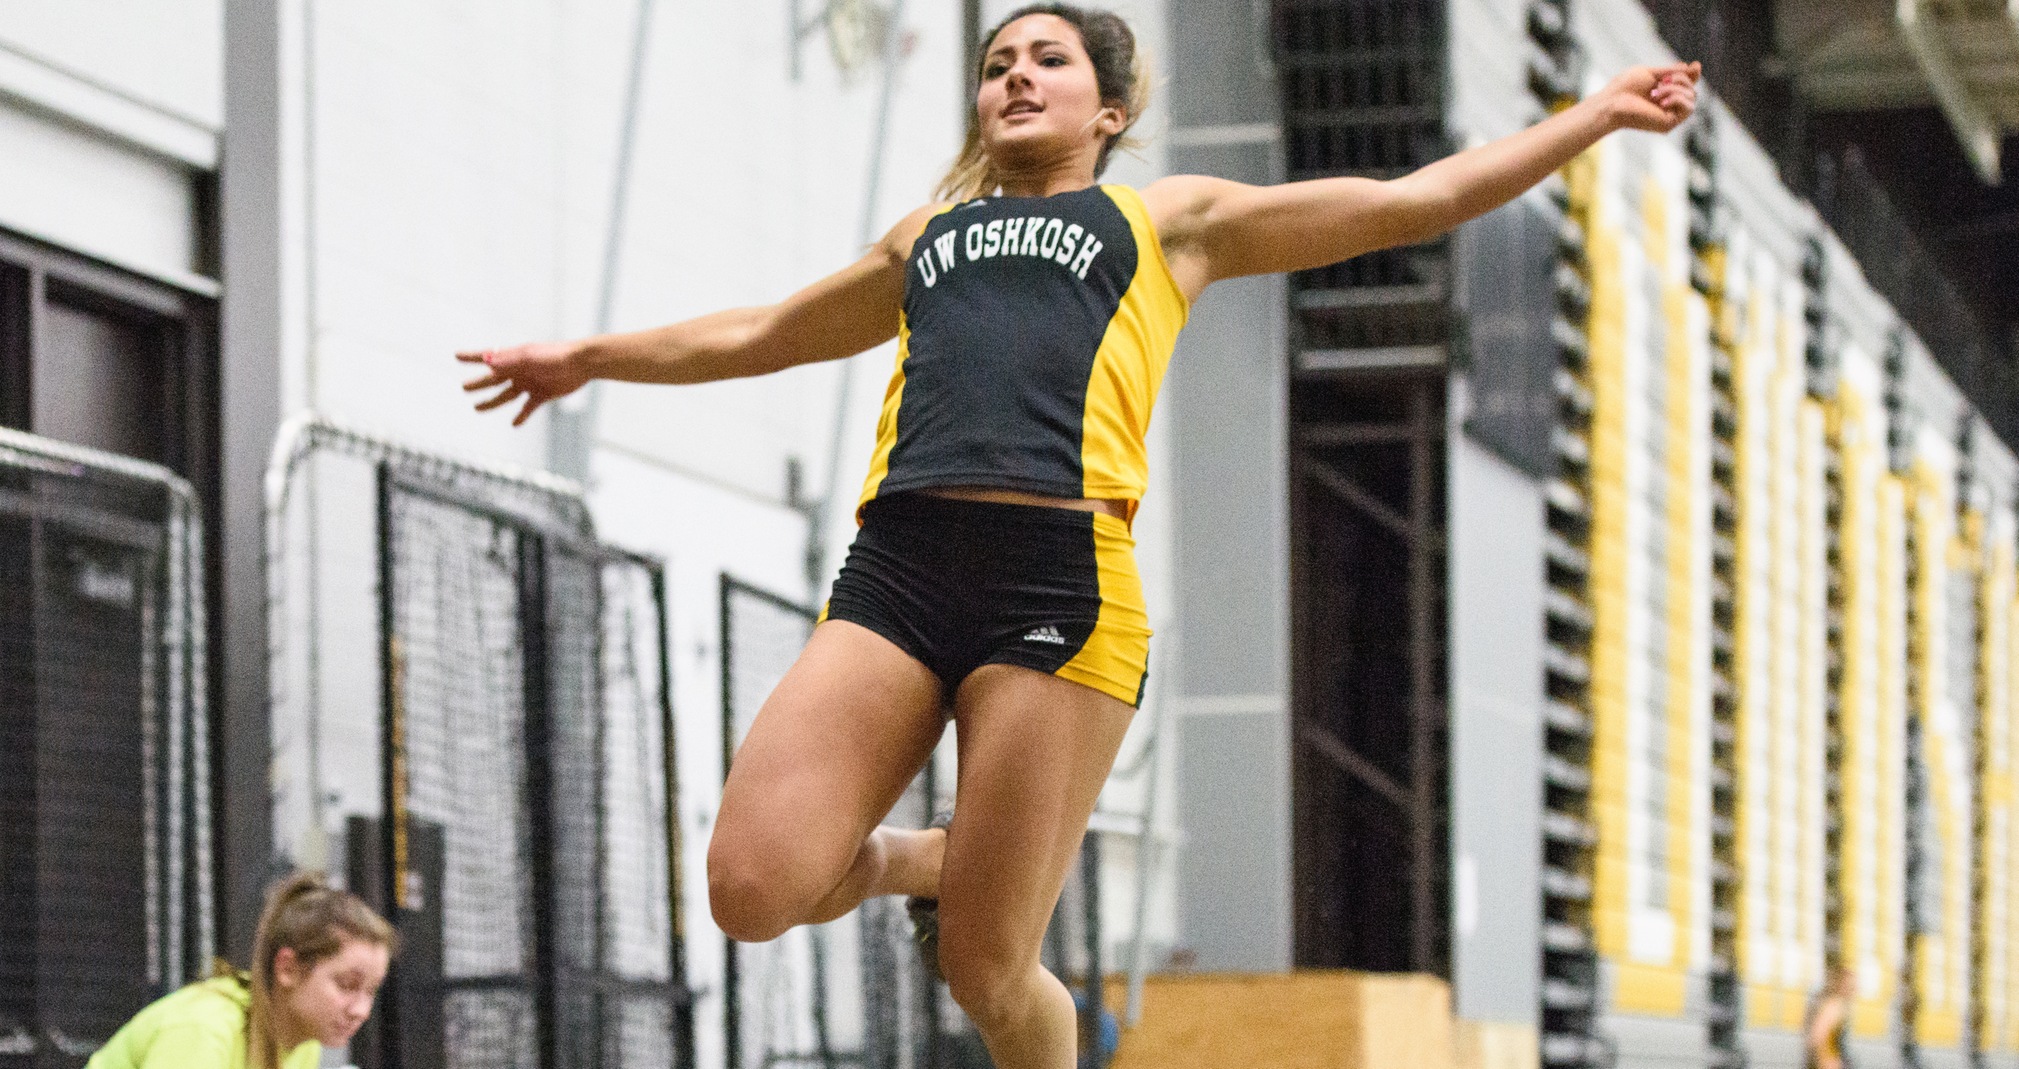 Karina Marchan won the long jump with the 10th-best measurement (18-1) in the NCAA Division III this season.